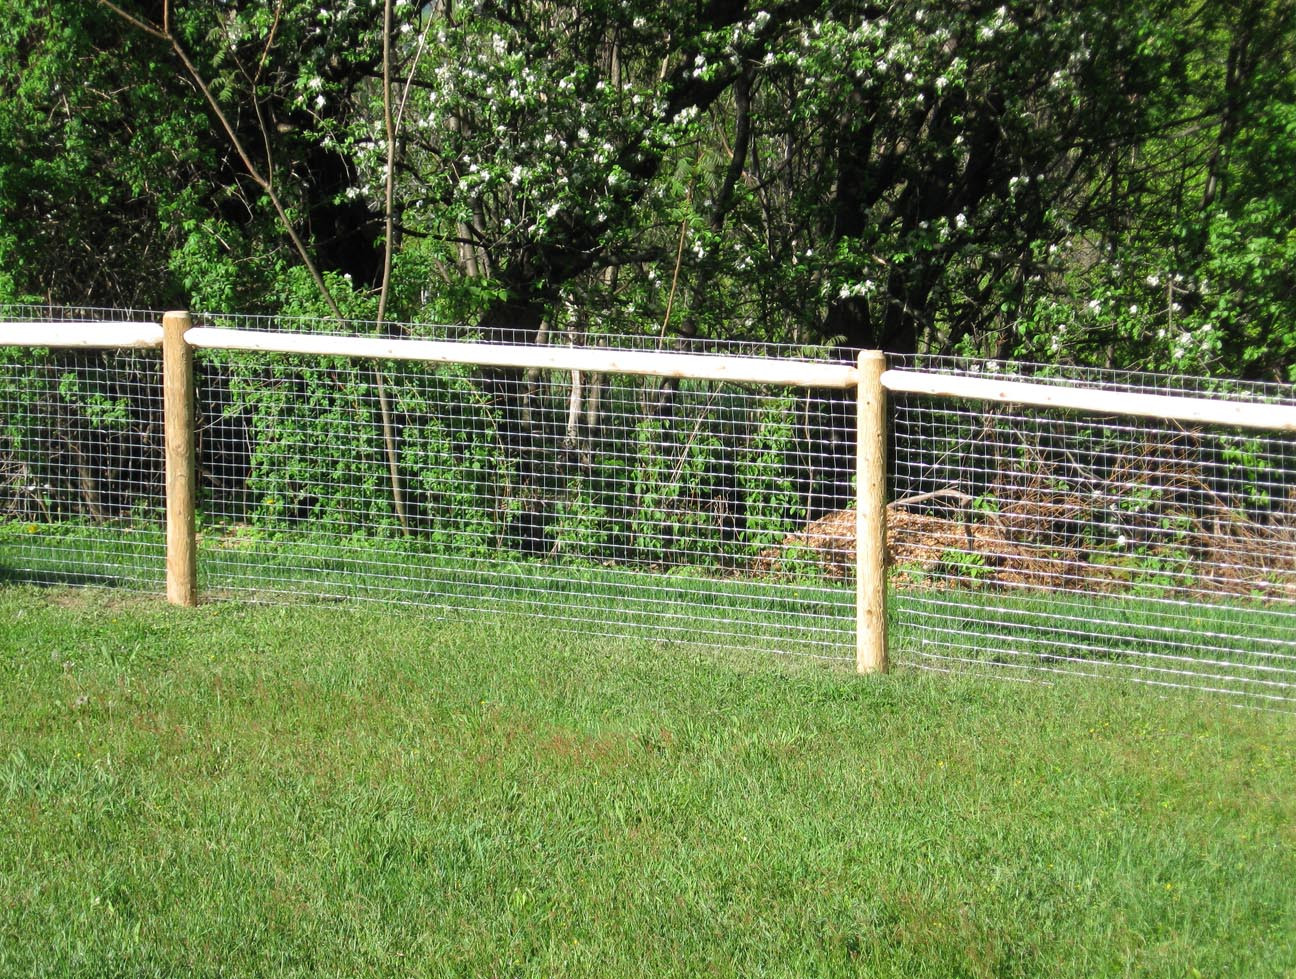 DIY Dog Fencing
 Cheap Fence Ideas For Dogs In DIY Reusable And Portable